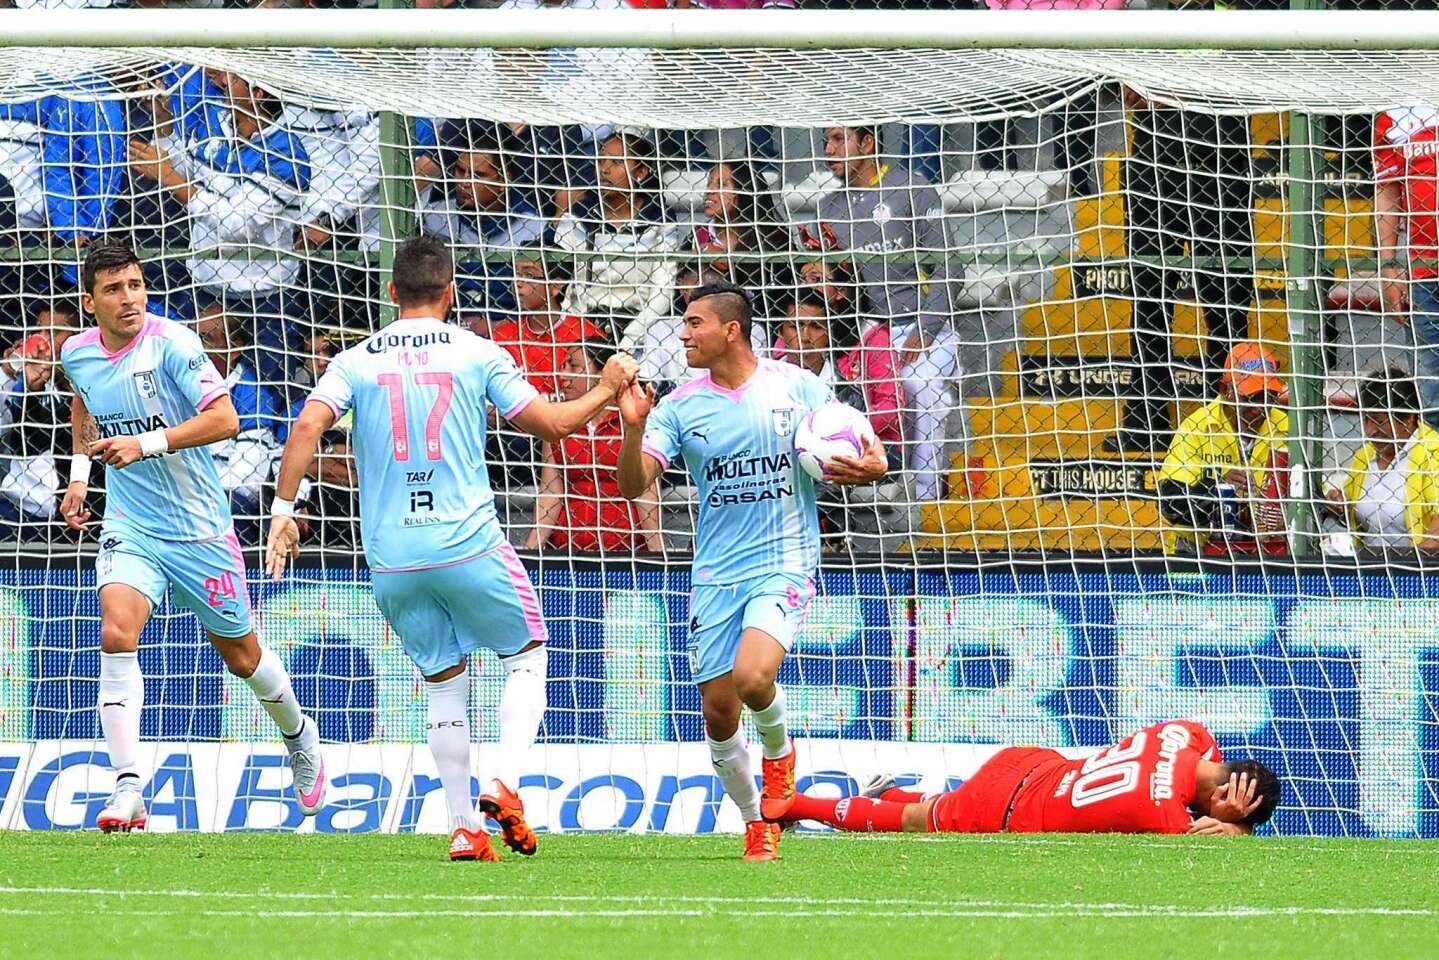 Queretaro's Orbelin Pineda (R) celebrates with teammates Mario Osuna (C) and Edgar Benites (L) after scoring a goal against Toluca during their Mexican Apertura tournament football match at the Nemesio Diez stadium on October 18, 2015, in Toluca, Mexico. AFP PHOTO/MARIA CALLSMARIA CALLS/AFP/Getty Images ** OUTS - ELSENT, FPG, CM - OUTS * NM, PH, VA if sourced by CT, LA or MoD **